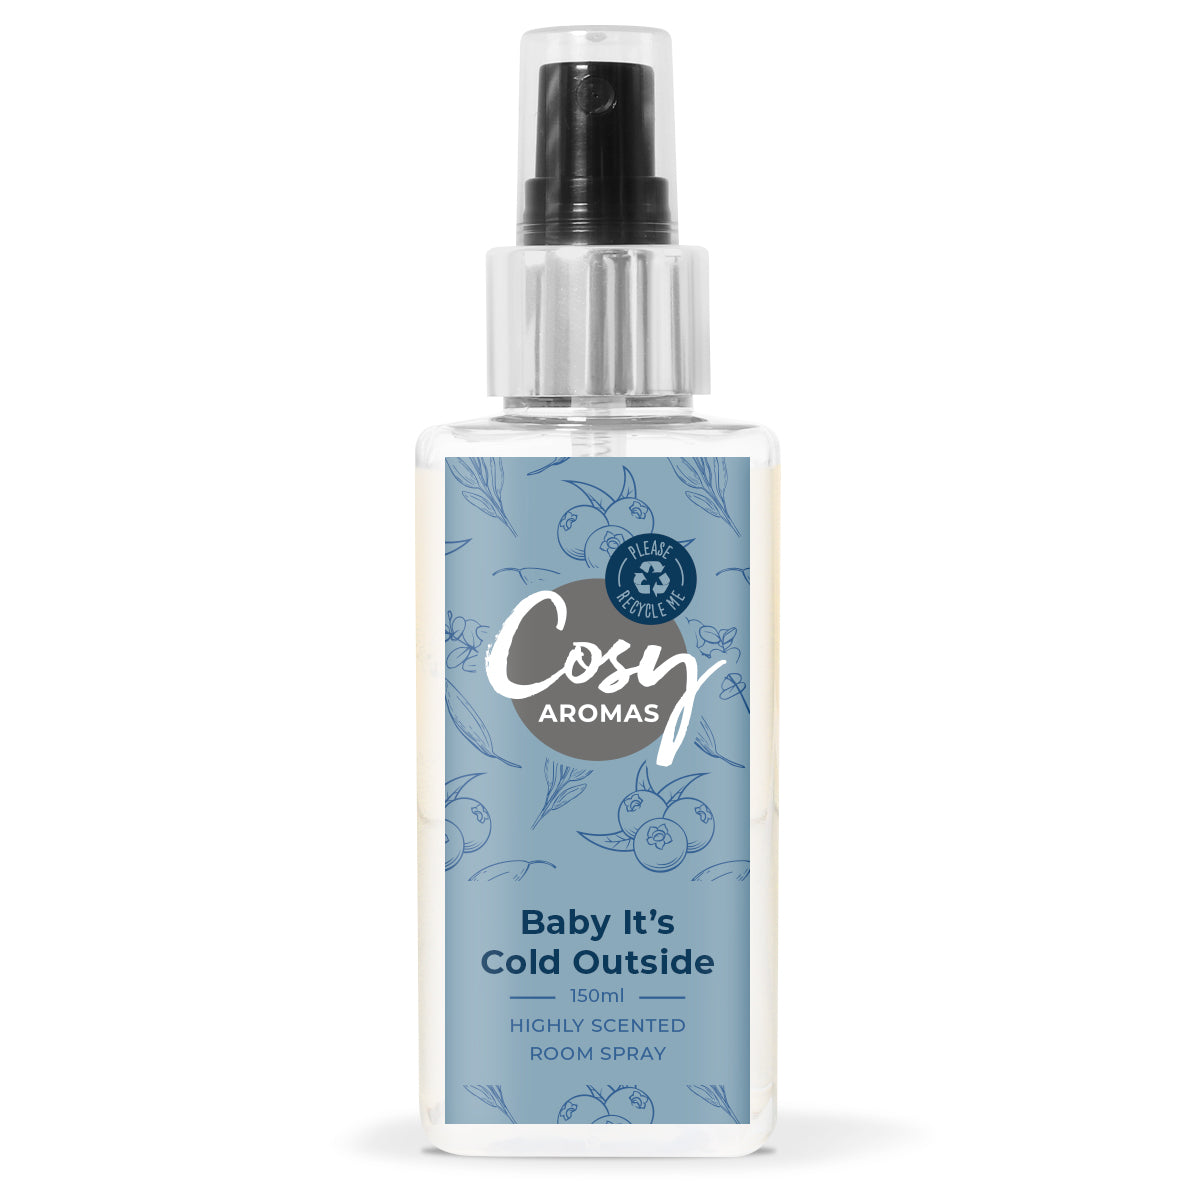 Baby It's Cold Outside Room Spray